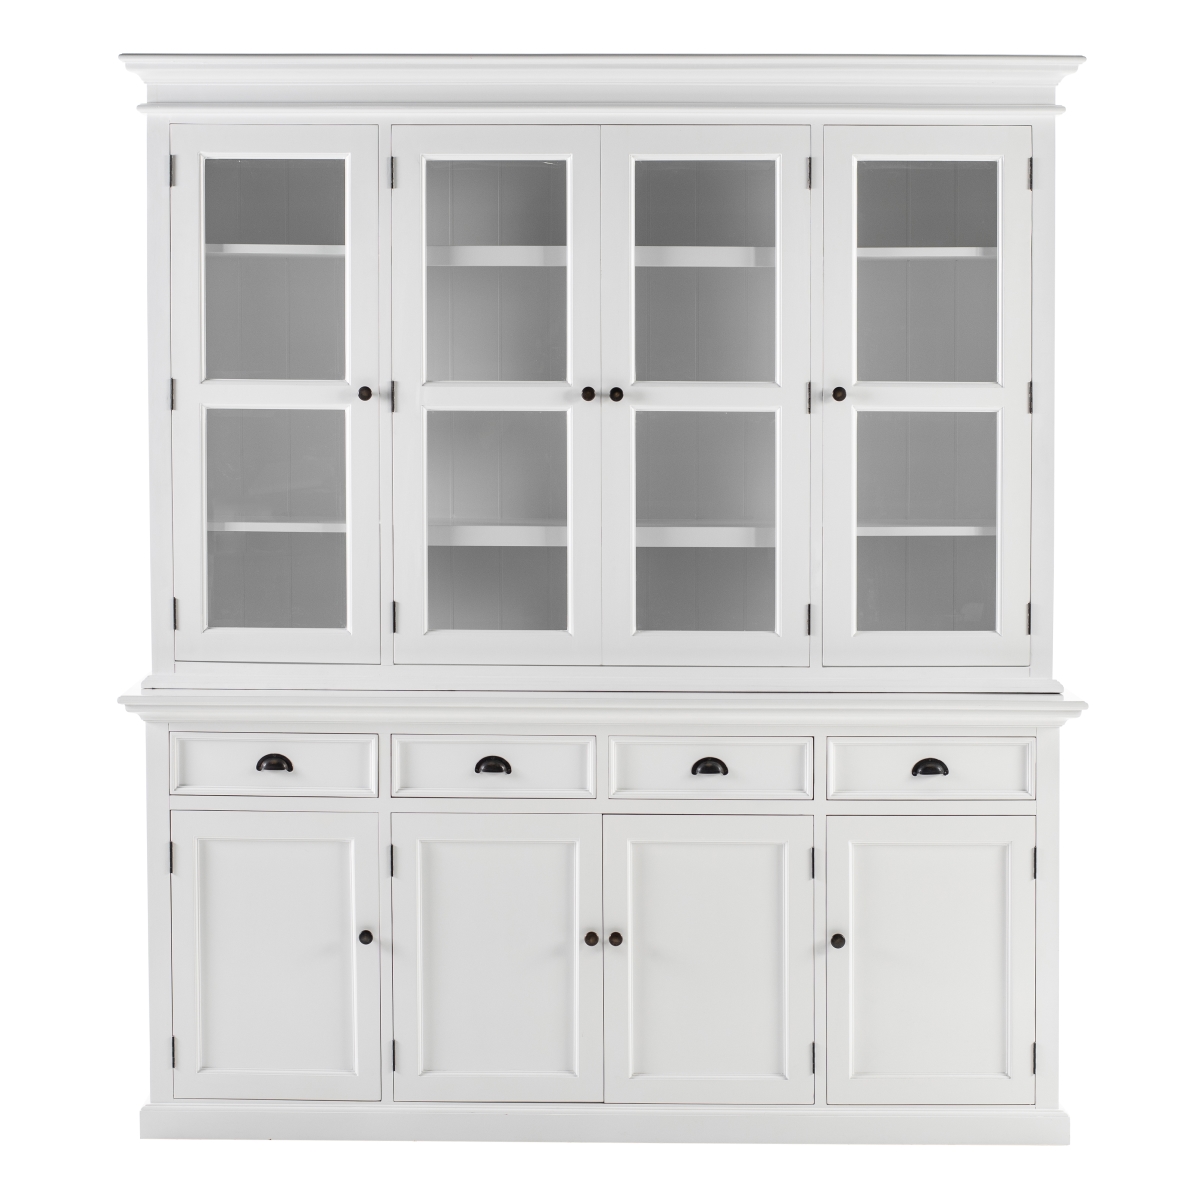 Picture of NovaSolo Furniture BCA610 Buffet Hutch Unit with 4 Glass Doors, White